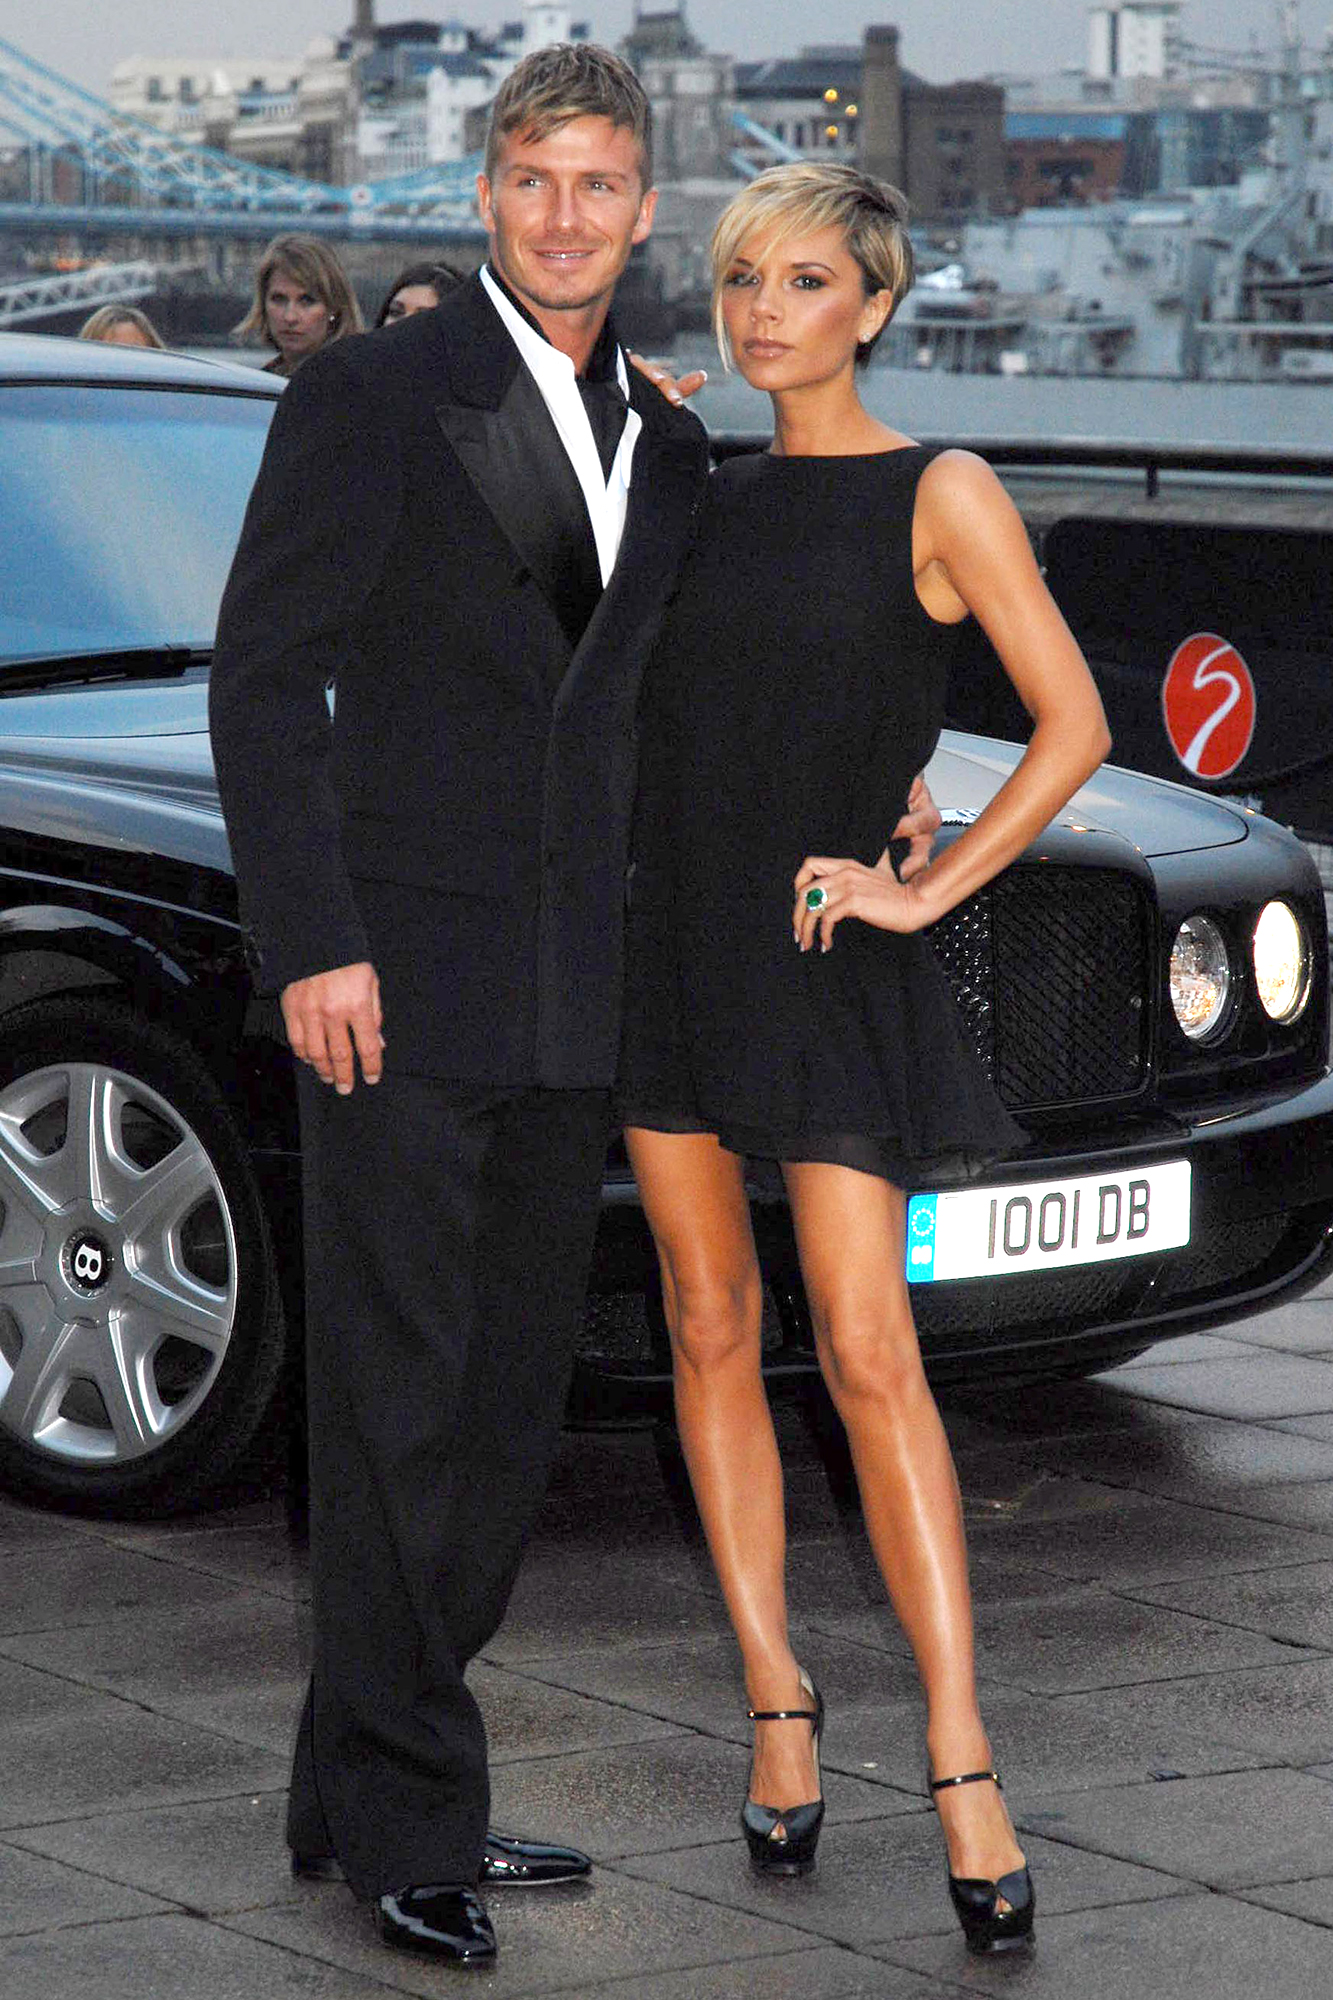 David Beckham and Victoria Beckham's Best Matching Outfits | UsWeekly